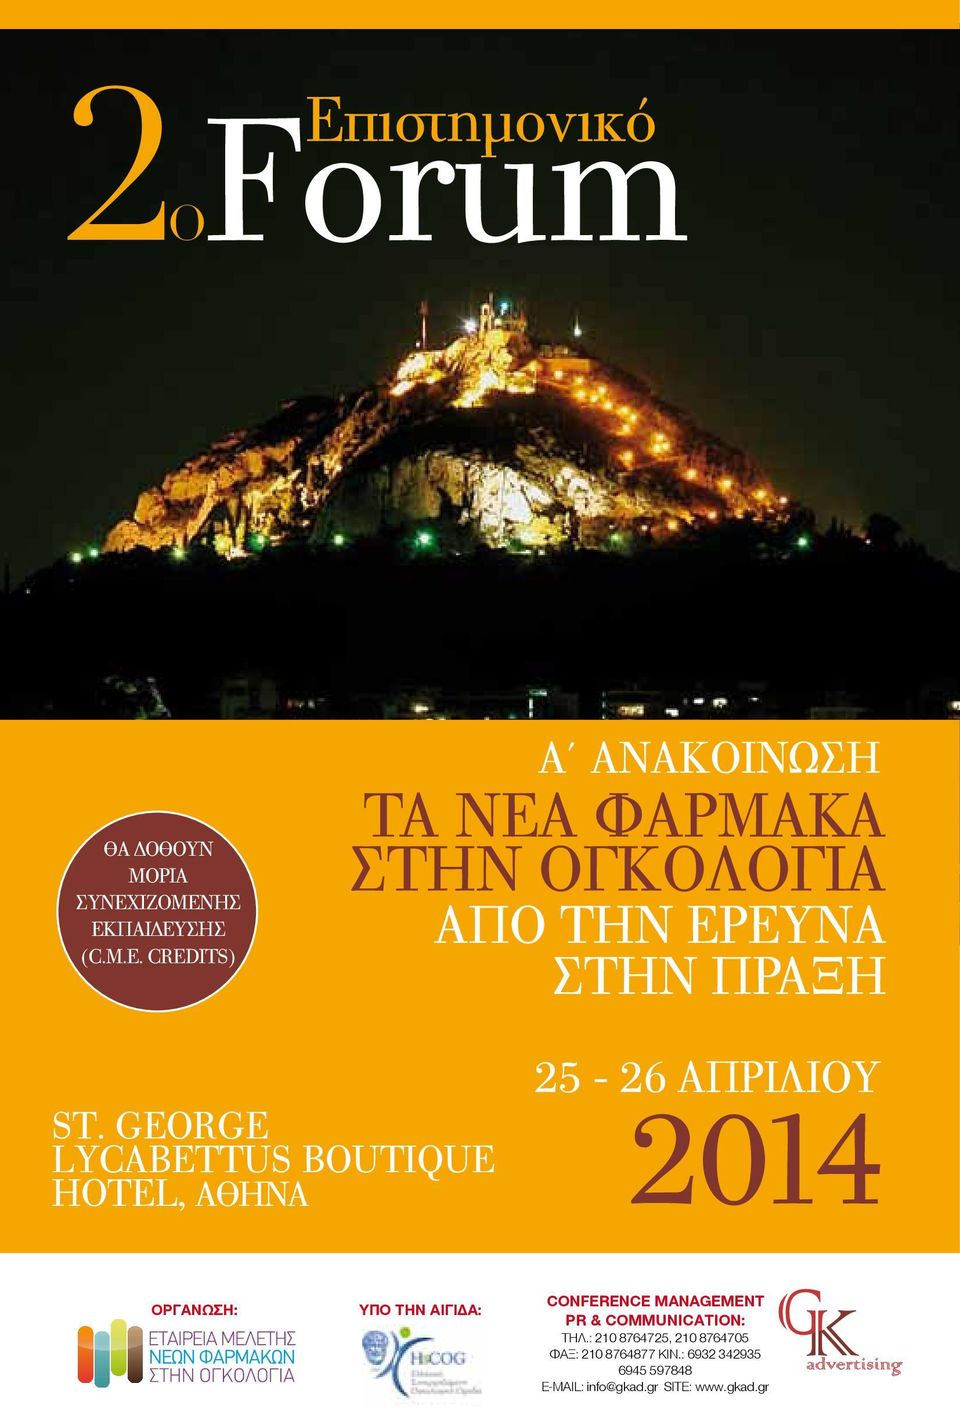 George Lycabettus Boutique Hotel, Αθήνα 25-26 Απριλίου 2014 Υπό την αιγίδα: CONFERENCE